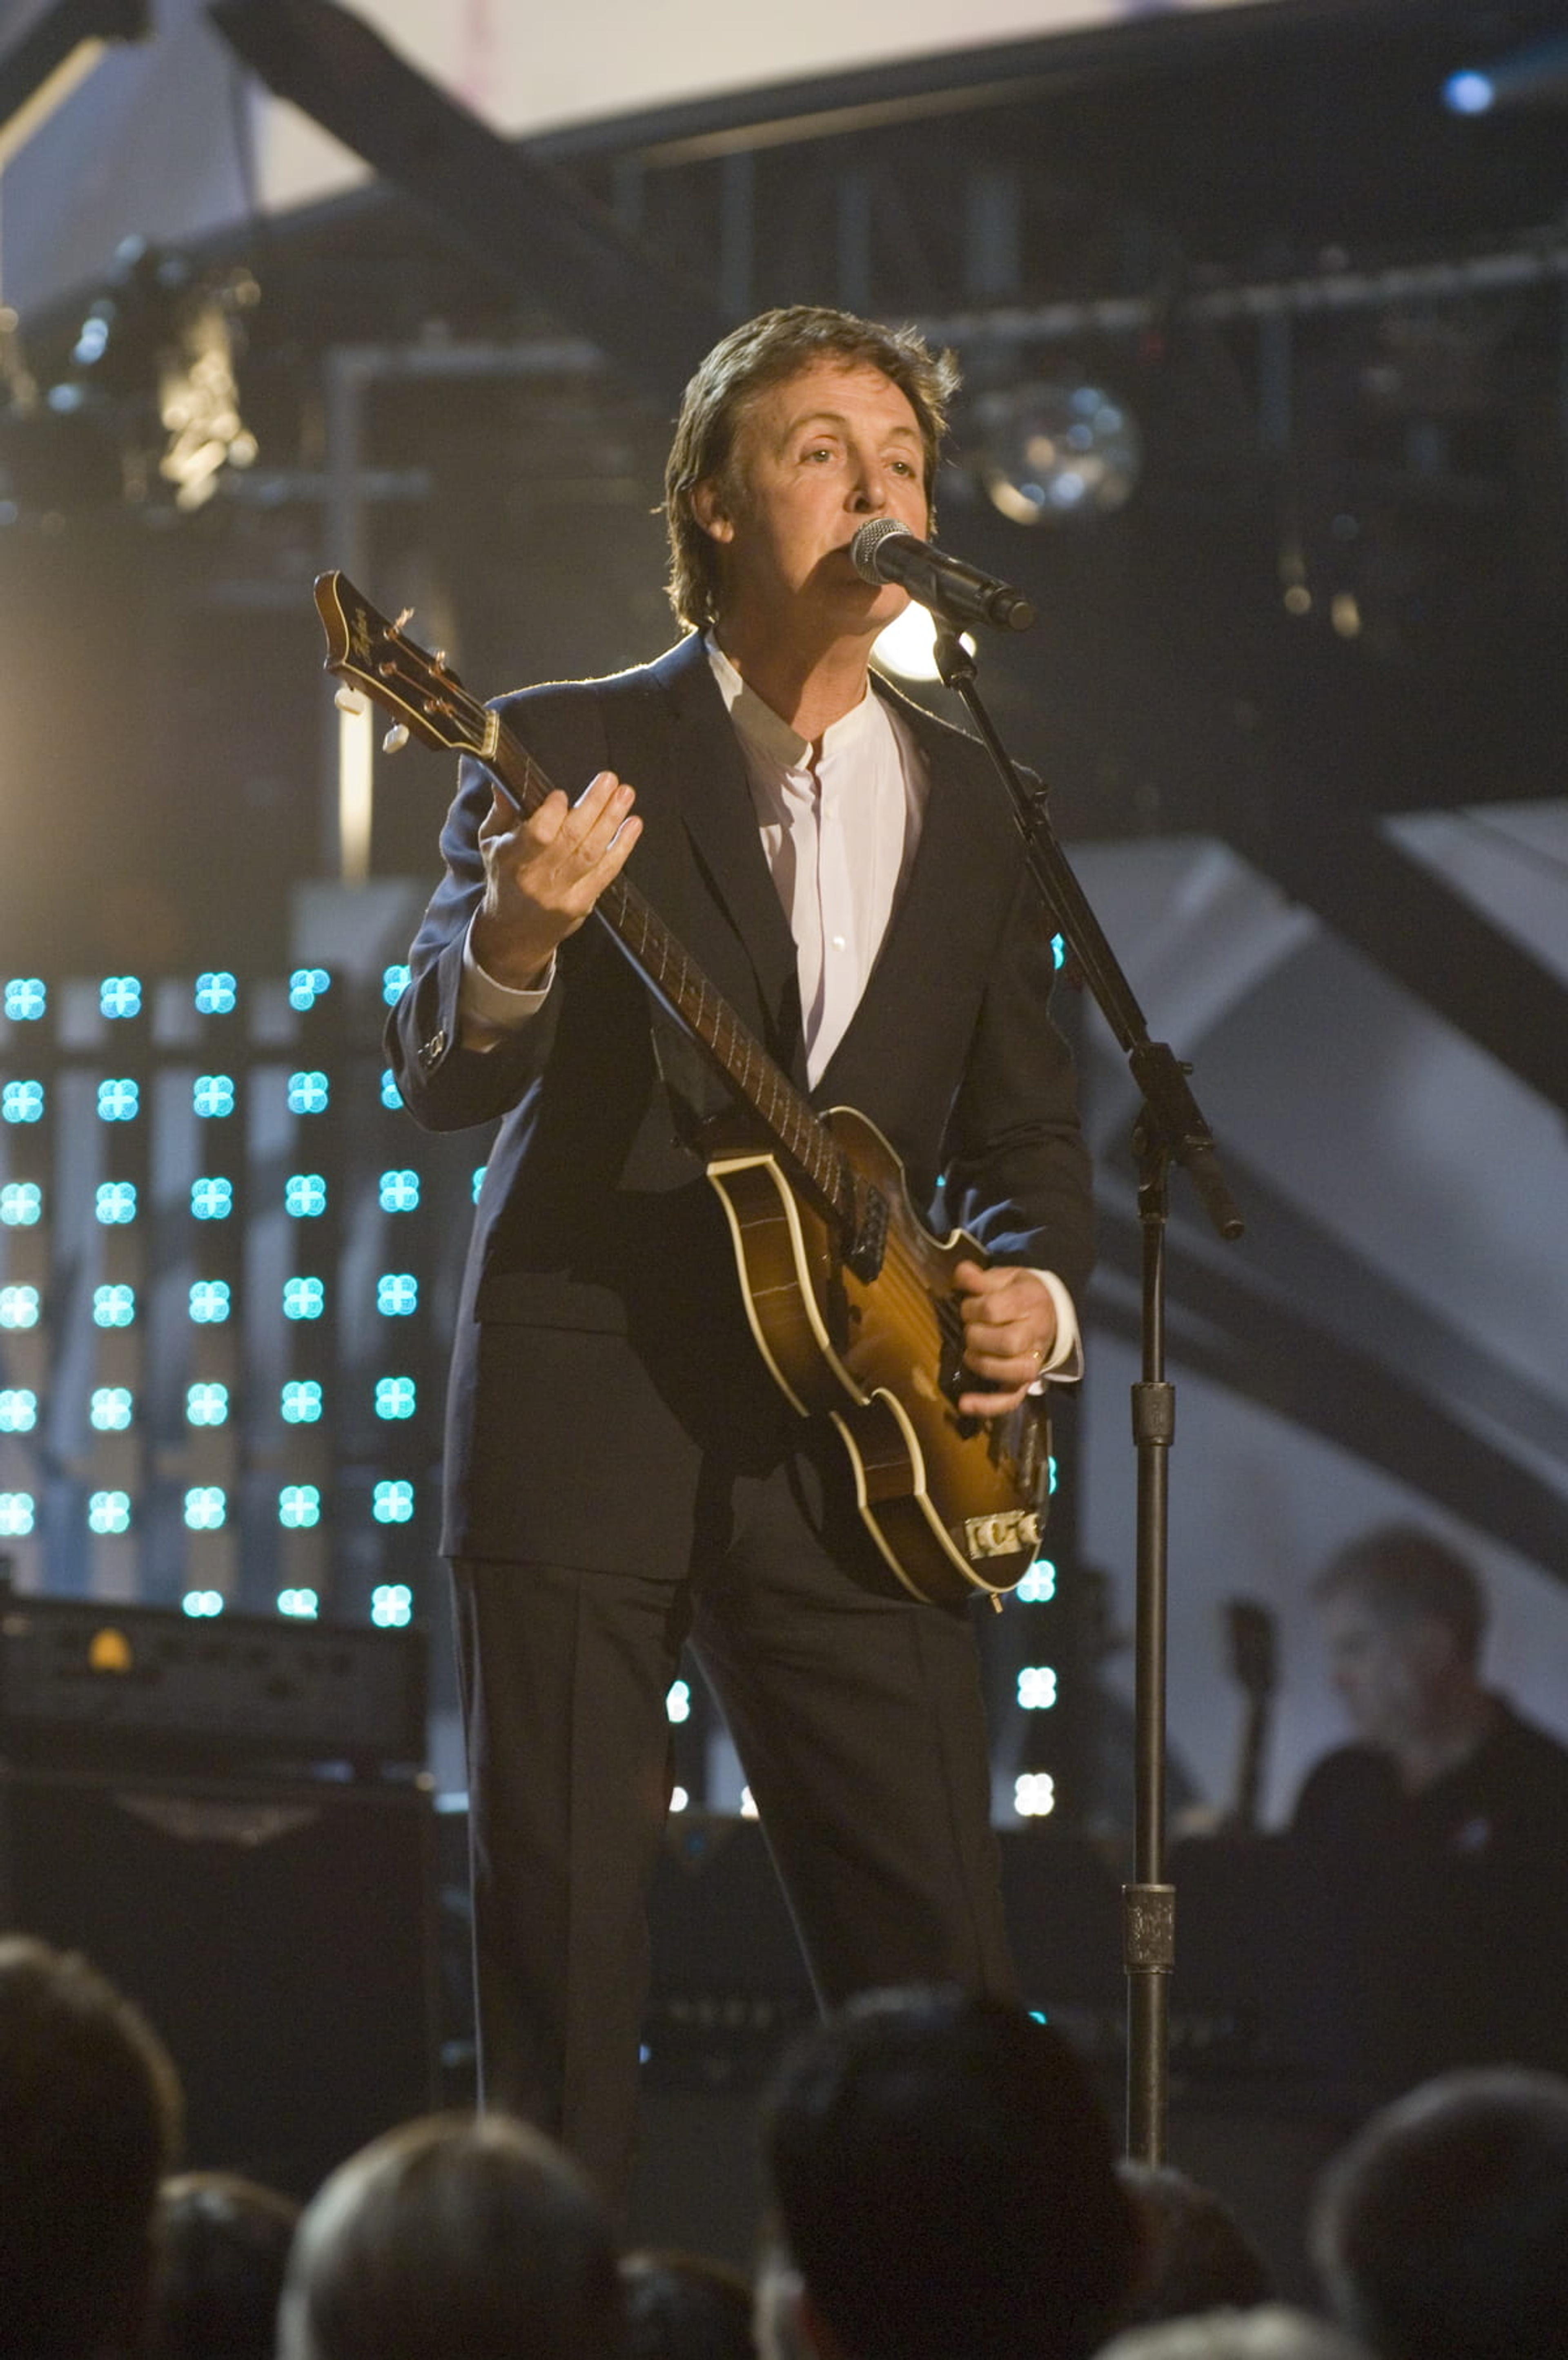 Paul standing on stage holding a bass guitar